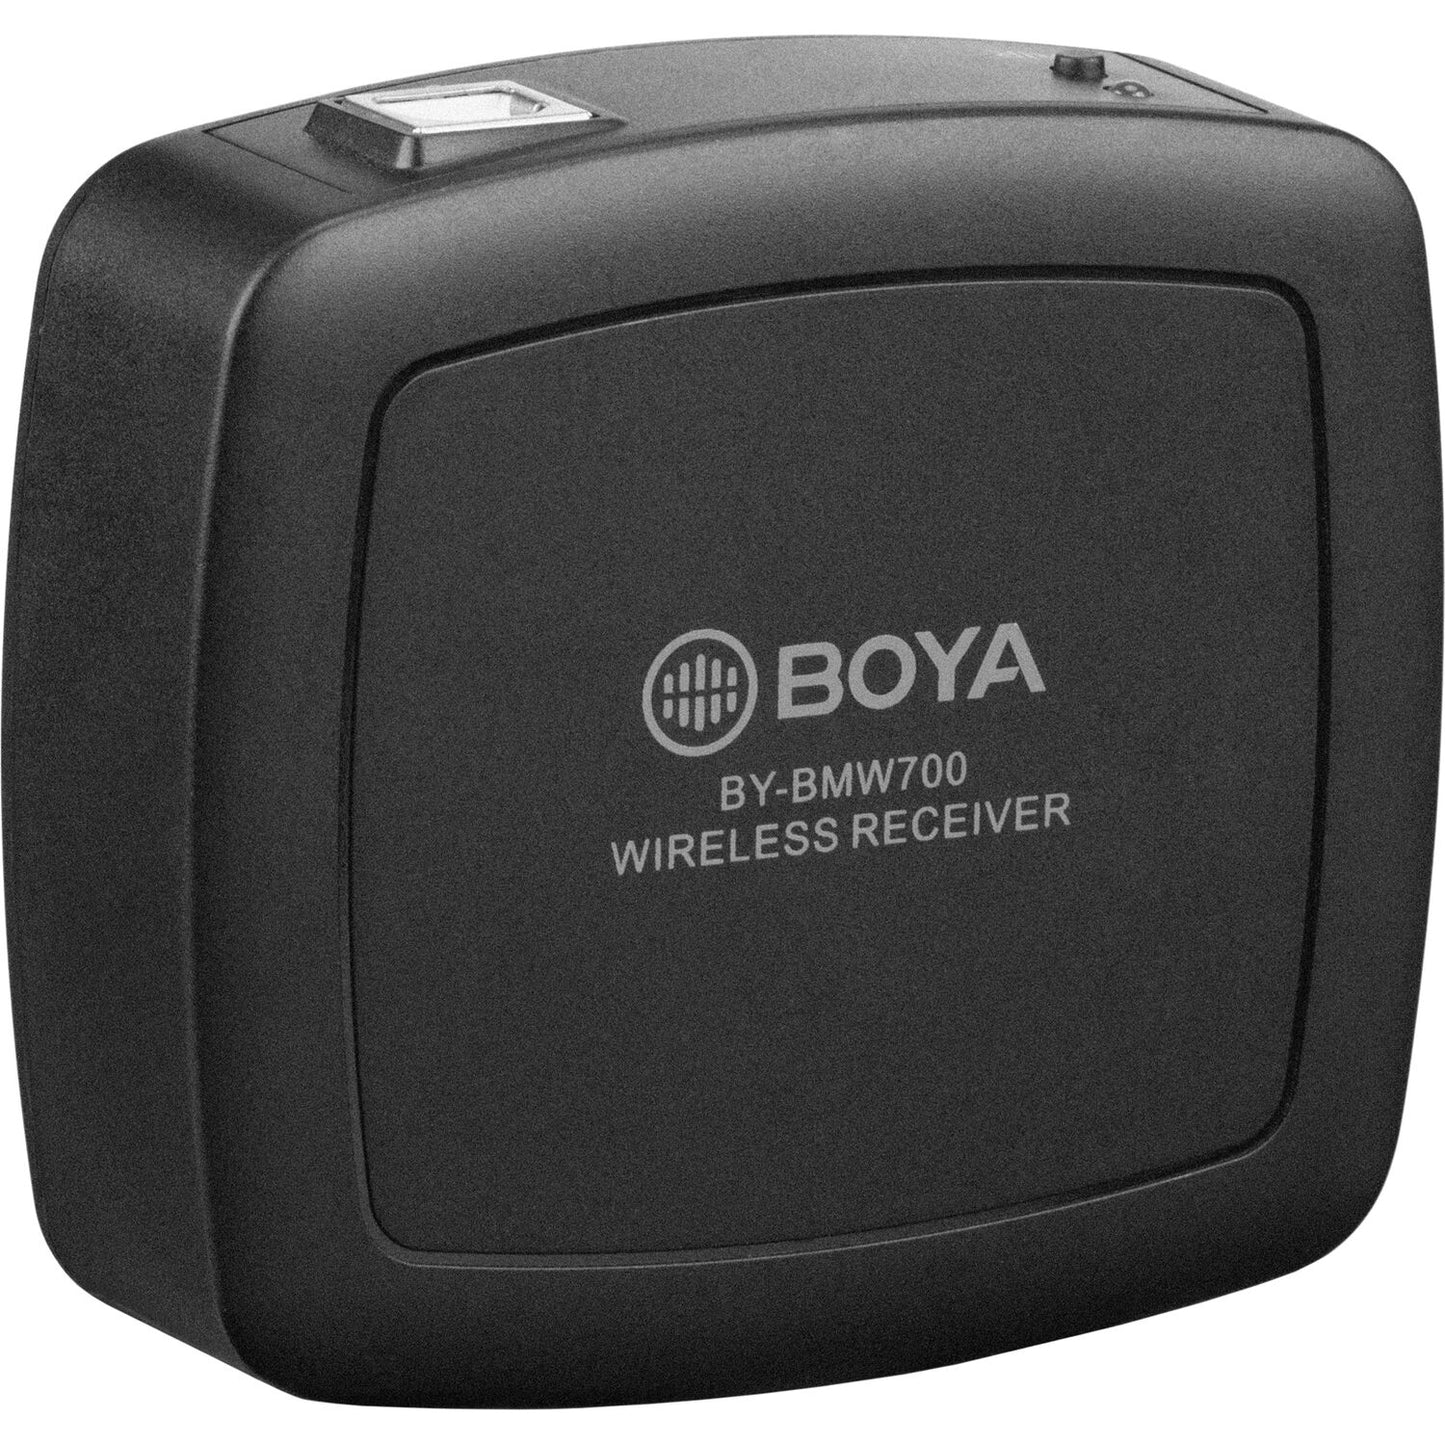 Boya BY-BMW700 Omnidirectional USB Table Top Desktop 2.4GHz Wireless Conference Microphone with 360° Pic for Meeting, Conference